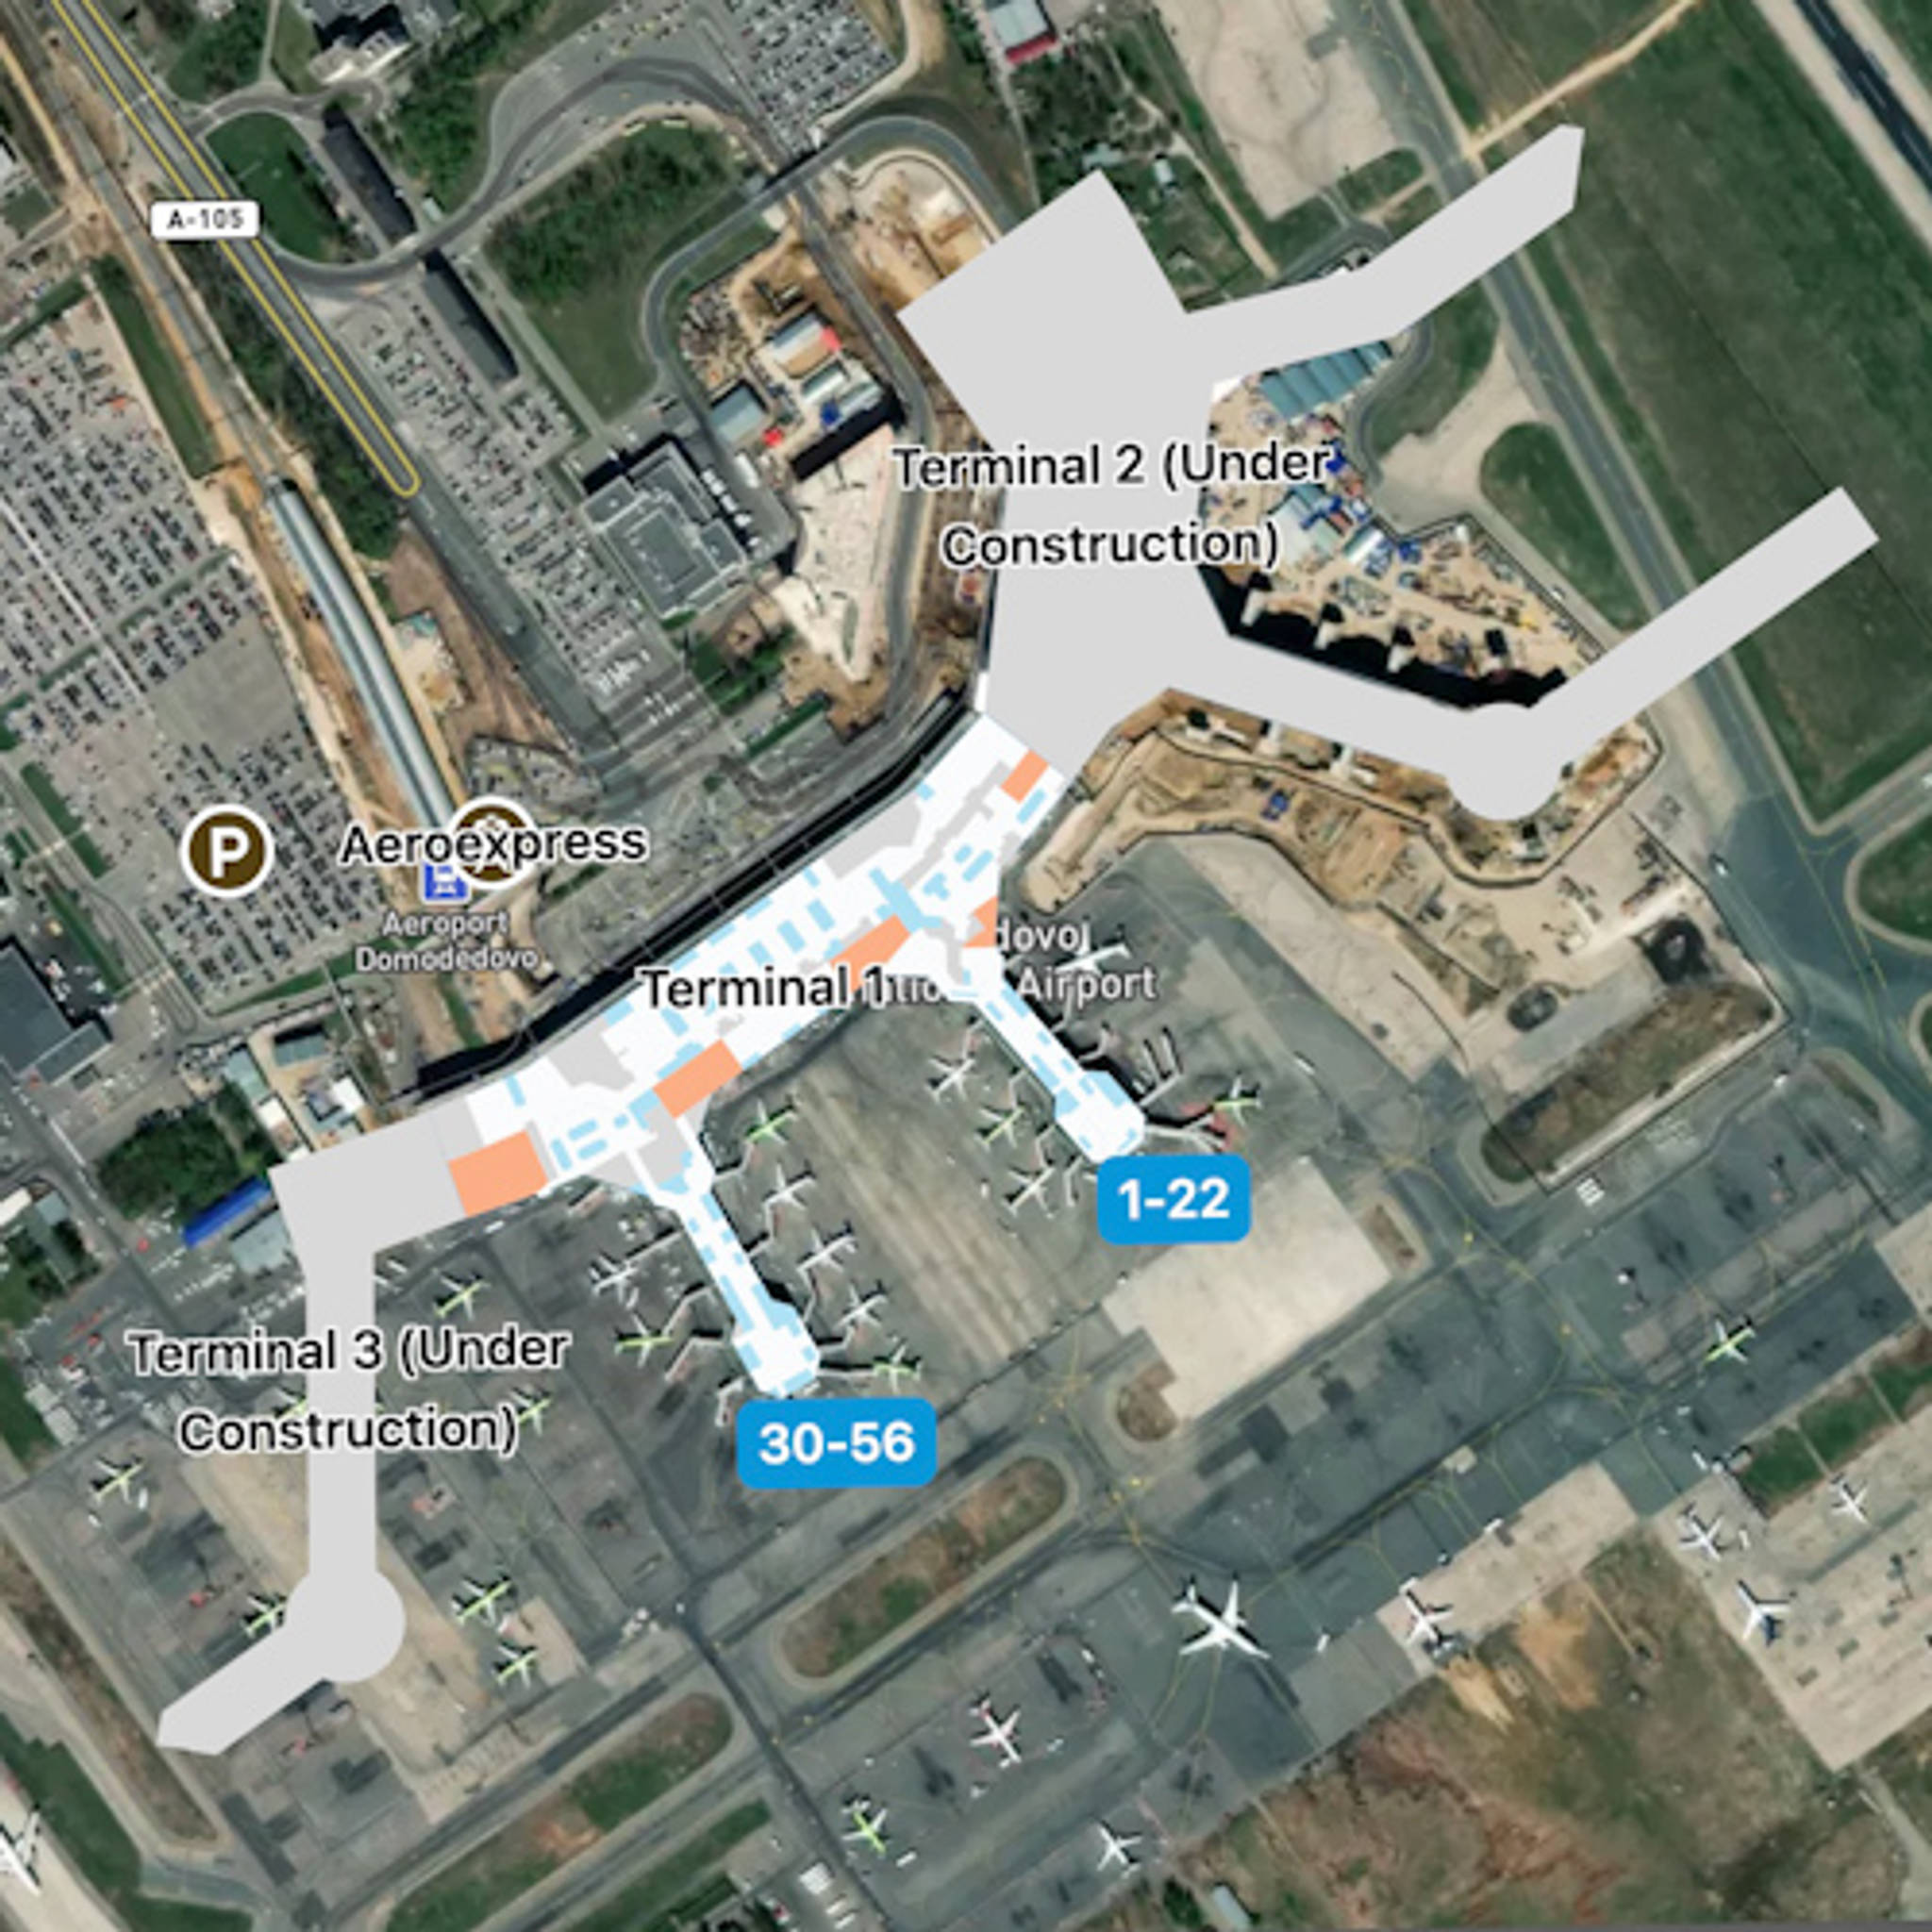 Moscow Domodedovo Airport DME Terminal Overview Map